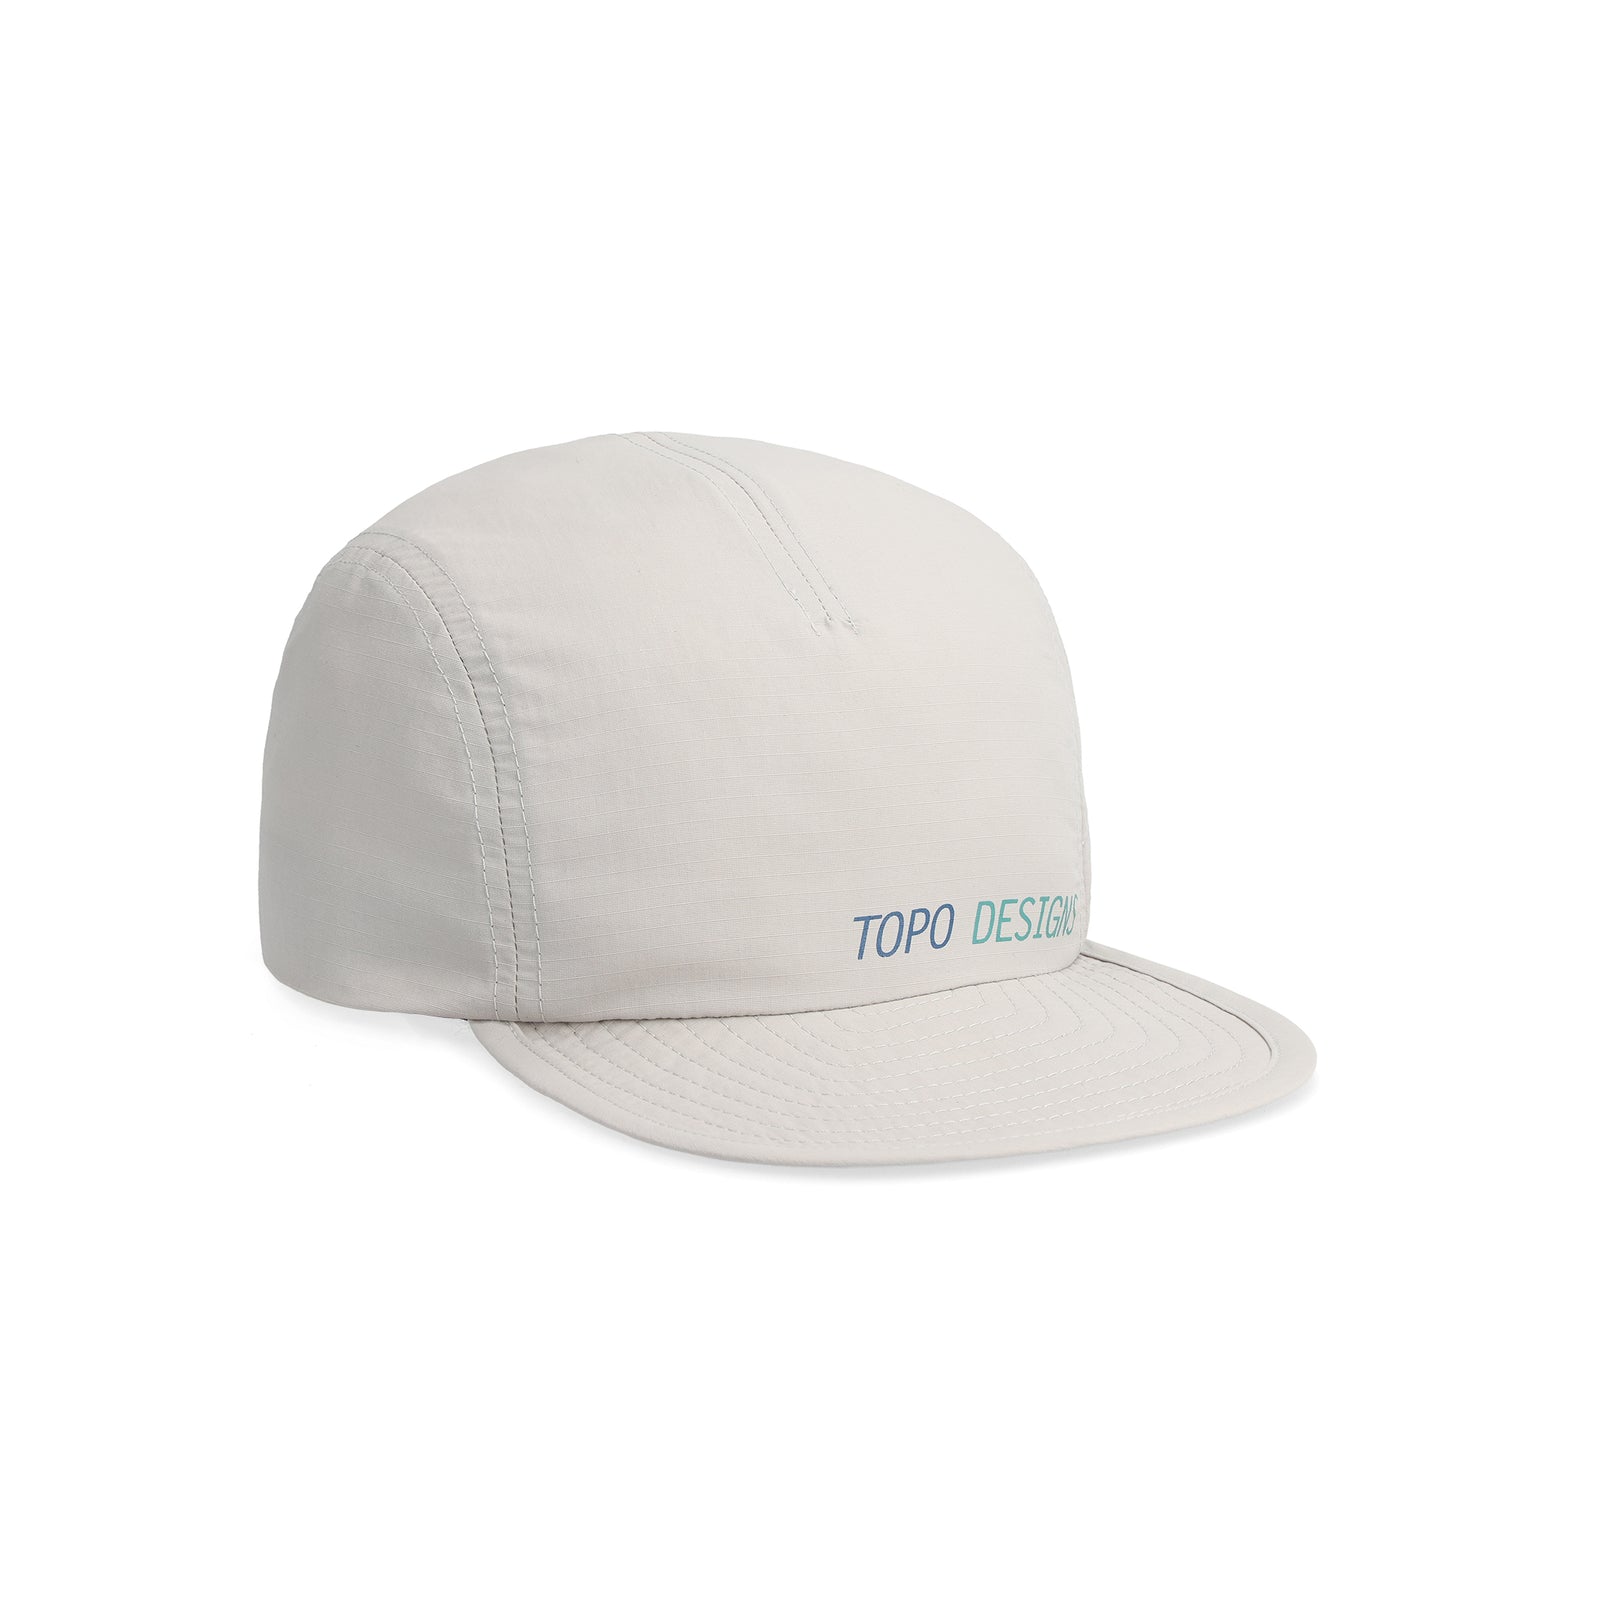 Front View of Topo Designs Global Packable Hat in "Light Gray"